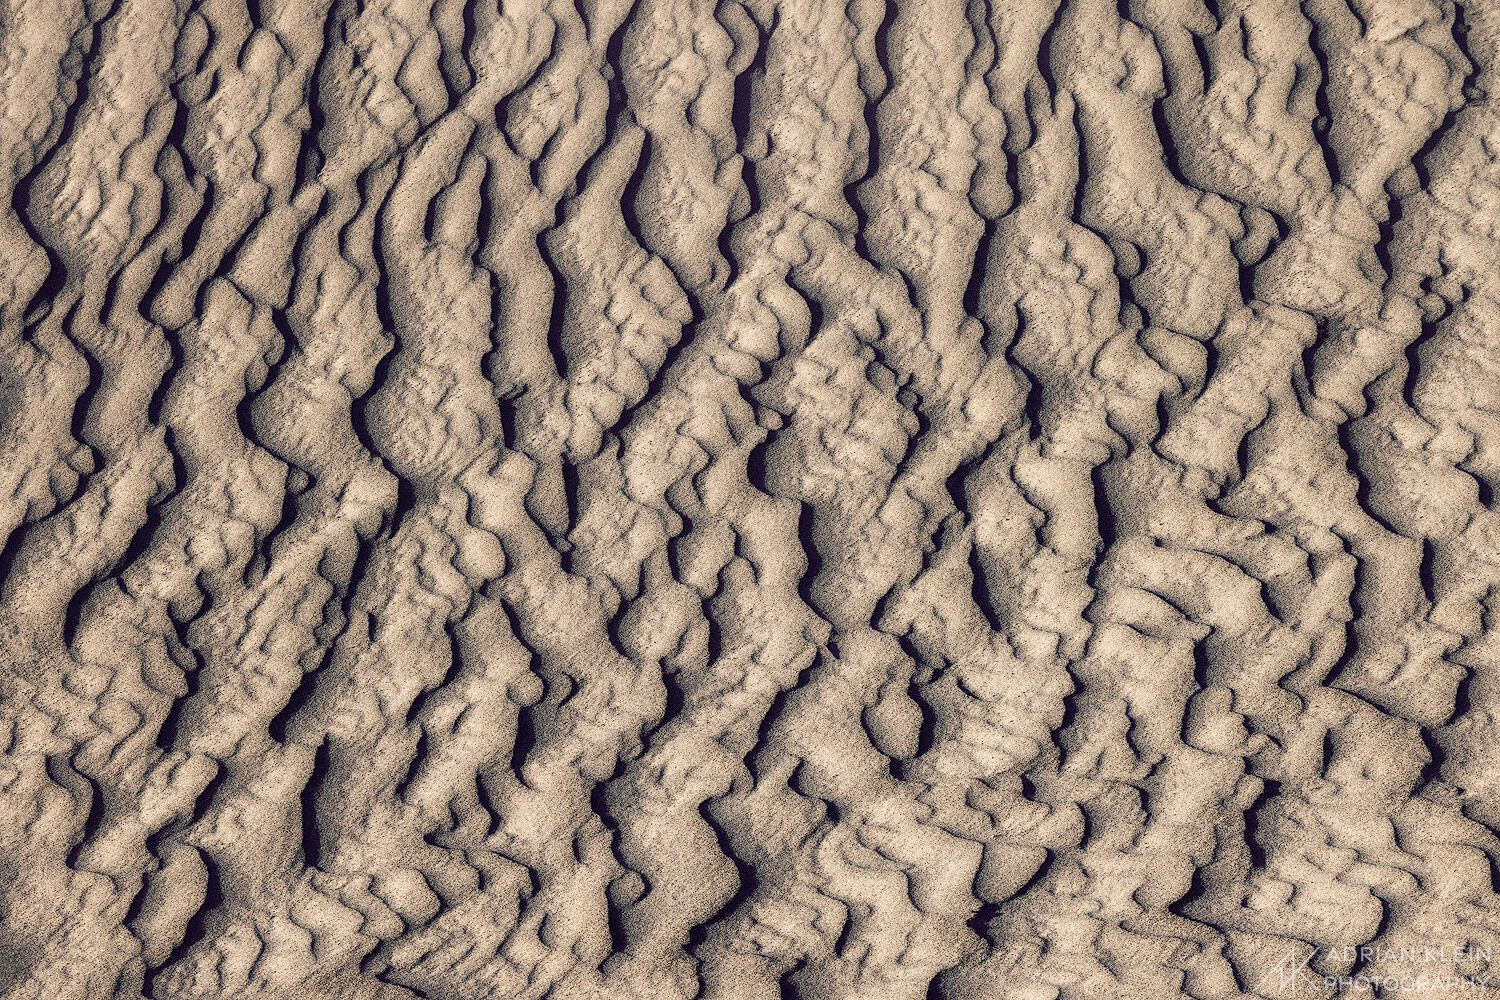 Sand dunes up close with endless wavy and scalloped texture. State of Washington.